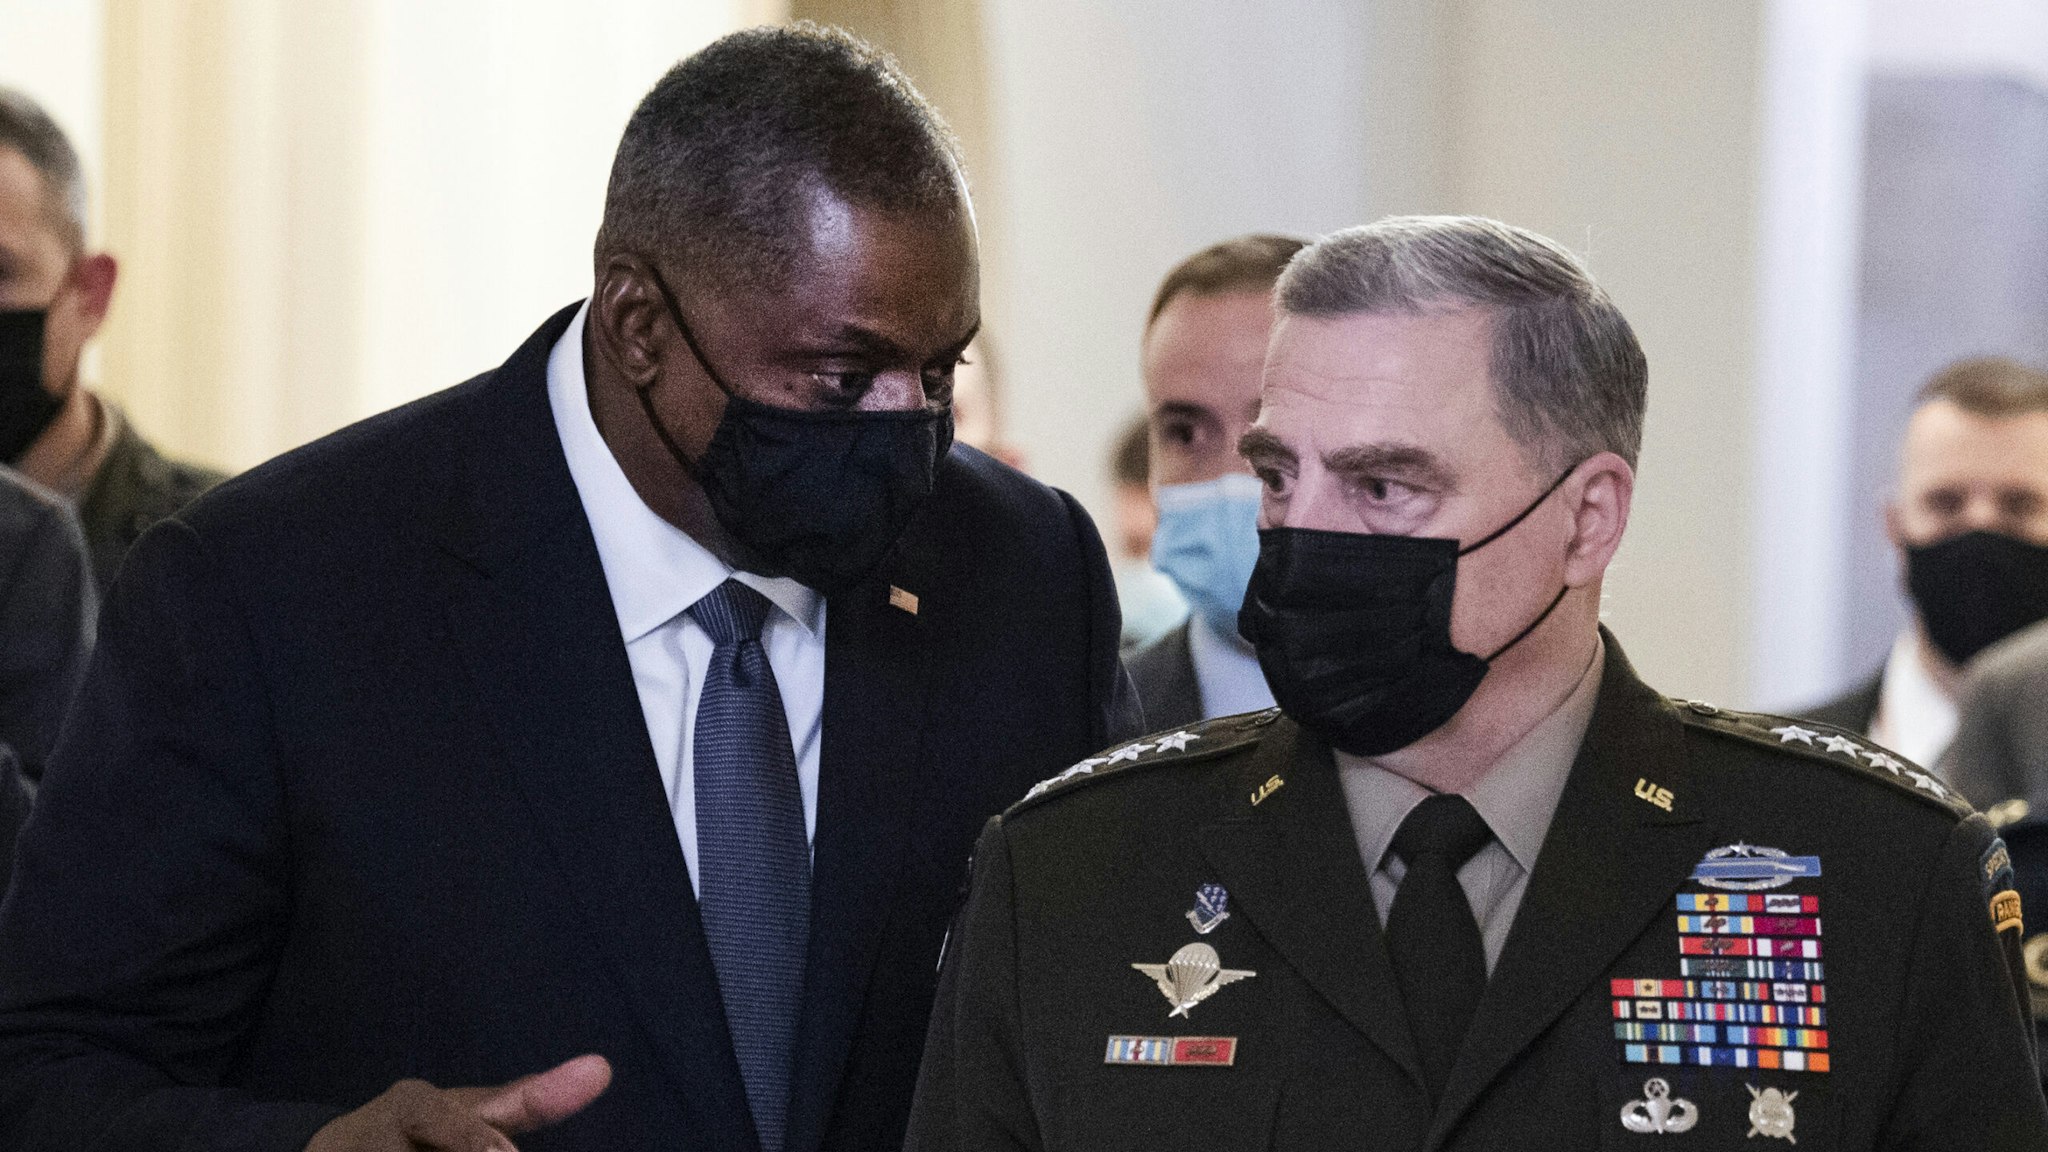 UNITED STATES - AUGUST 24: Chairman of the Joint Chiefs of Staff Gen. Mark Milley, right, and Defense Secretary Lloyd Austin leave the U.S. Capitol after briefing members of Congress on the U.S. withdrawal from Afghanistan on Tuesday, August 24, 2021.